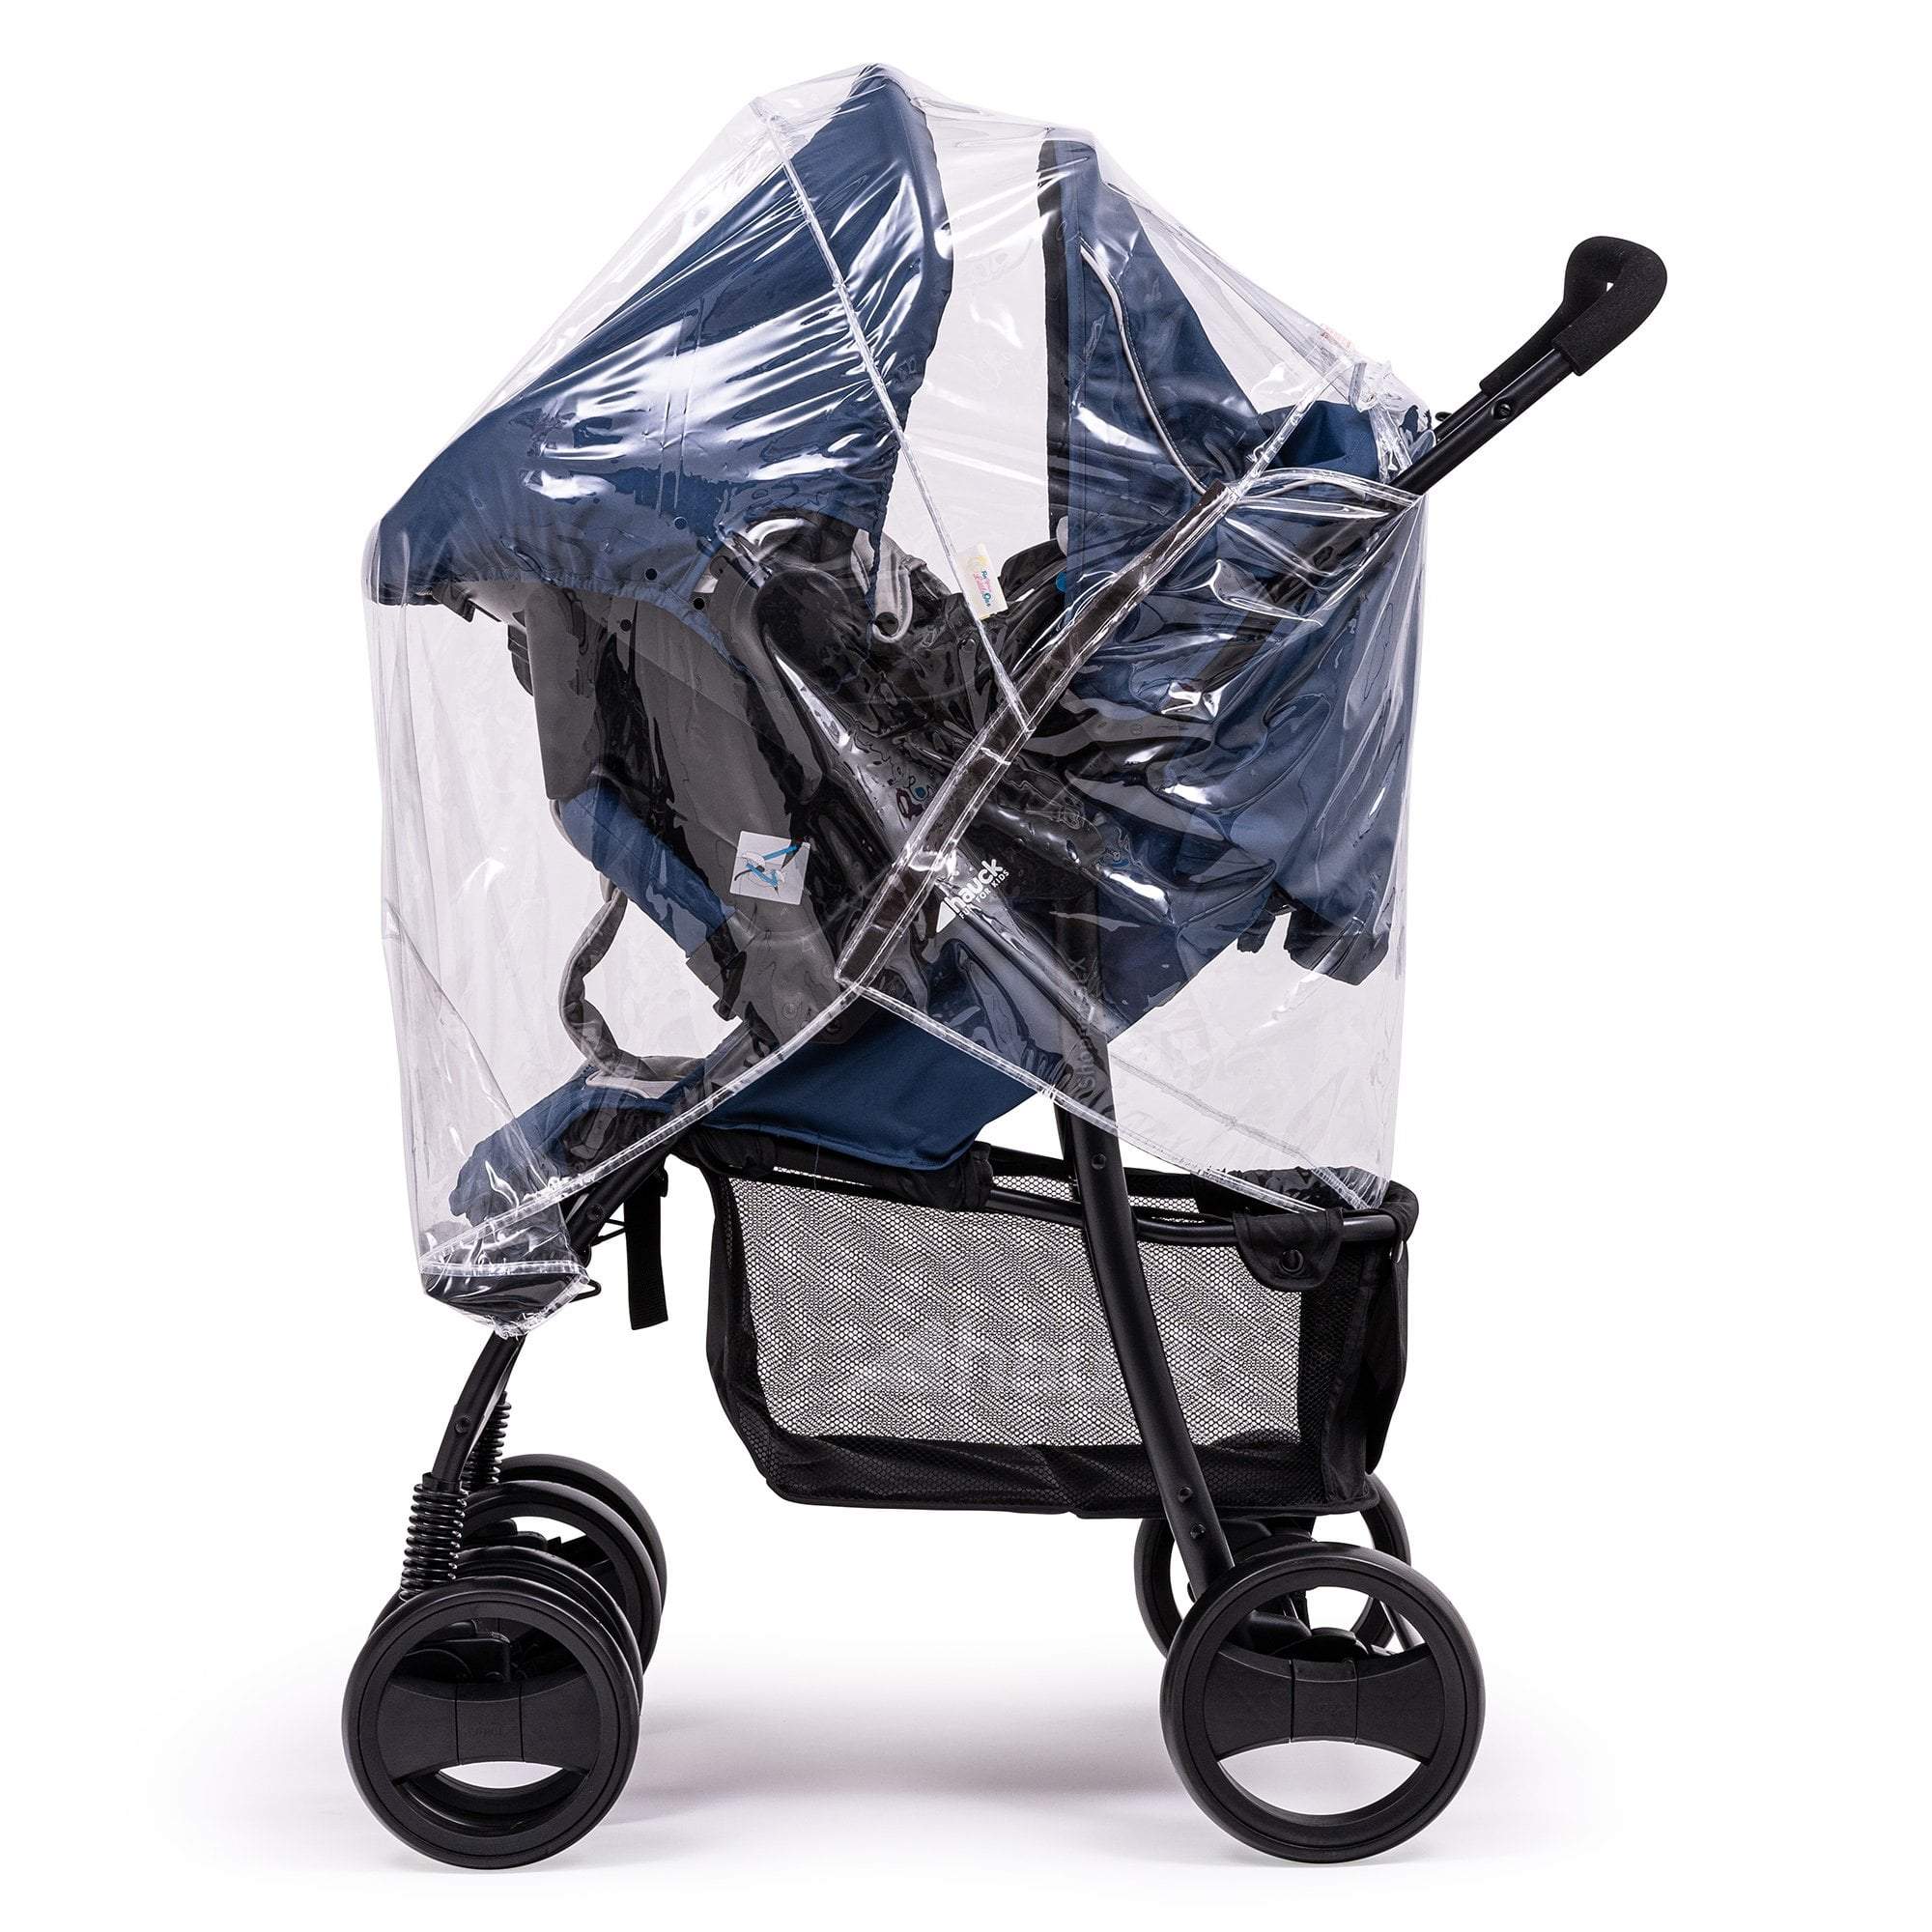 Travel System Raincover Compatible with Nuna - Fits All Models - For Your Little One